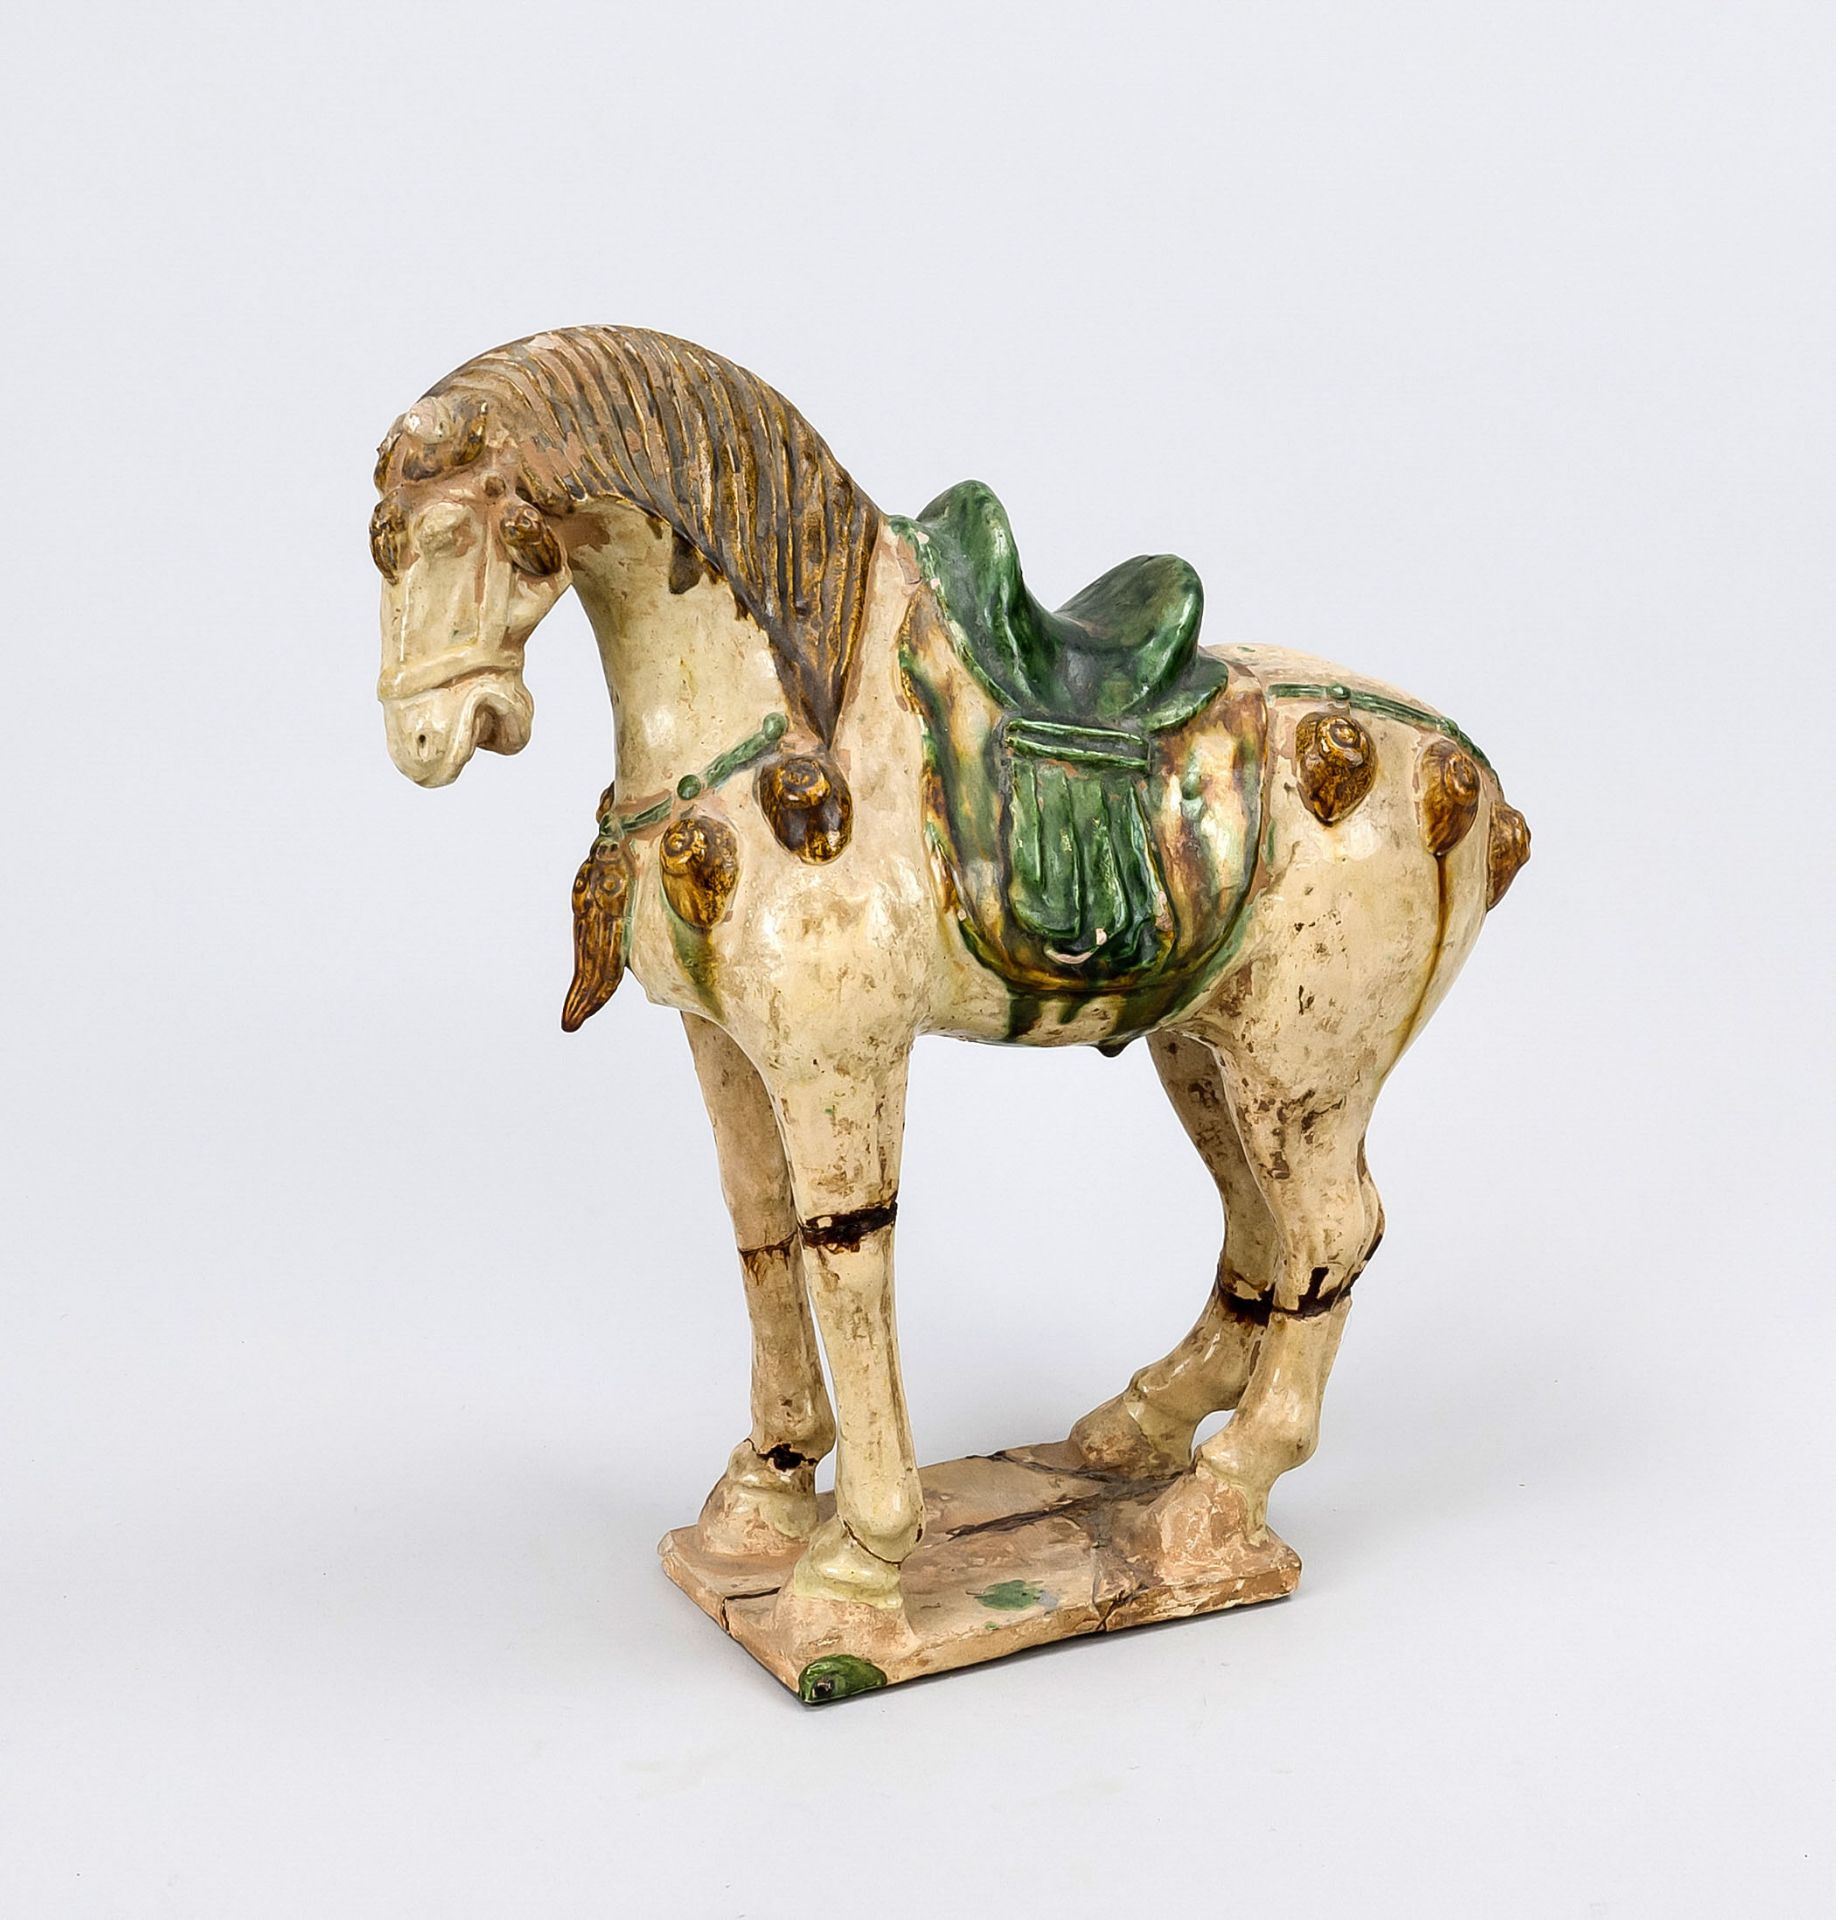 Horse, China, probably Tang dynasty. Earthenware with 3-color glaze (Sancai). Standing on a